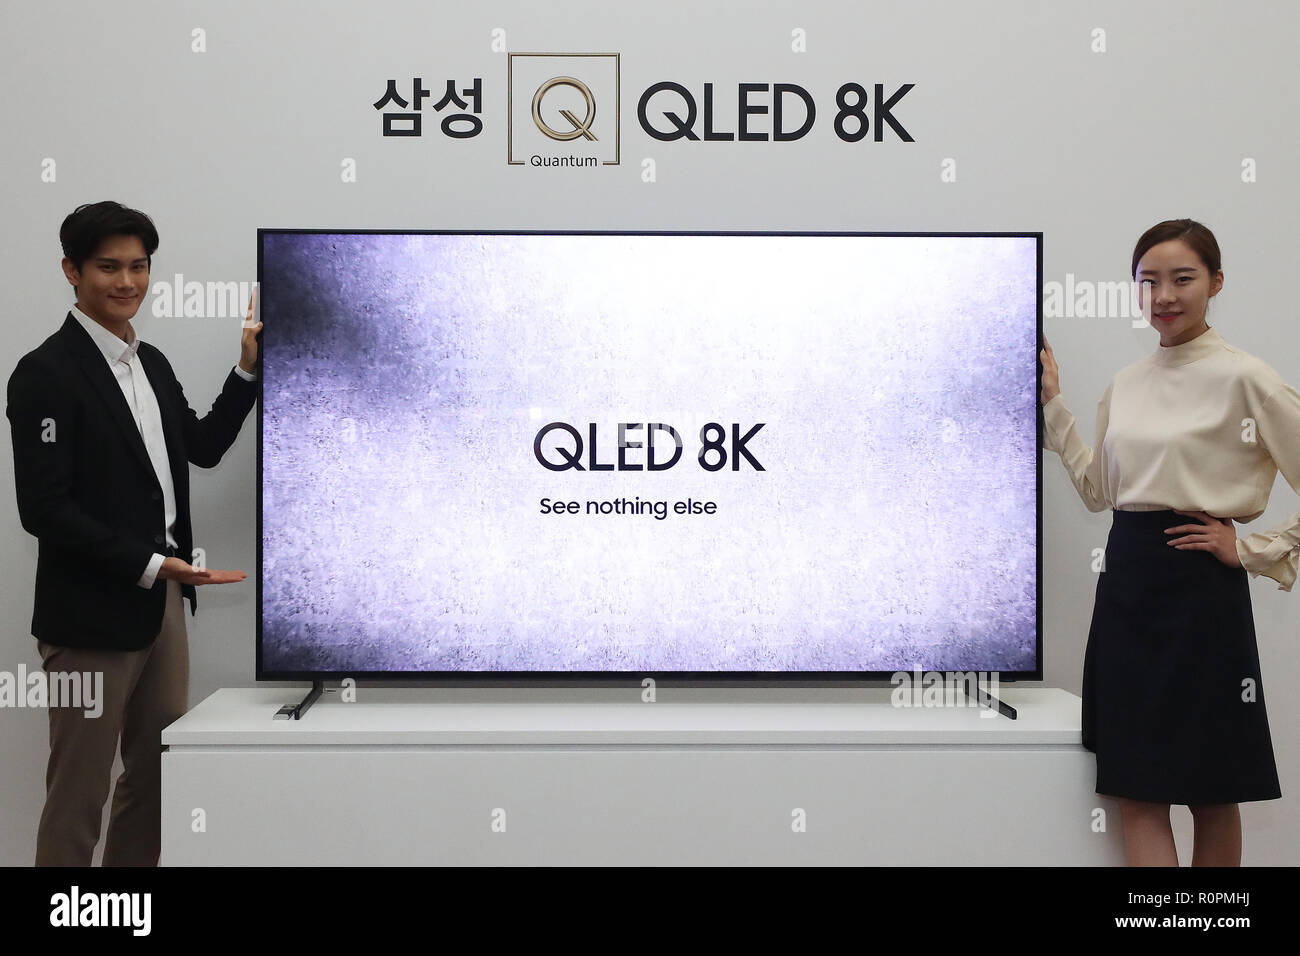 07th Nov, 2018. Samsung promotes QLED 8K in Seoul Employees stand next to a QLED 8K TV, a premium TV manufactured by Samsung Electronics, during a publicity event in Seoul on Nov. 7, 2018. The QLED 8K is one of Samsung Electronics' latest premium TVs. The tech giant has been promoting QLED TVs as their high-end products, which utilize quantum dot technology. Credit: Yonhap/Newcom/Alamy Live News Stock Photo